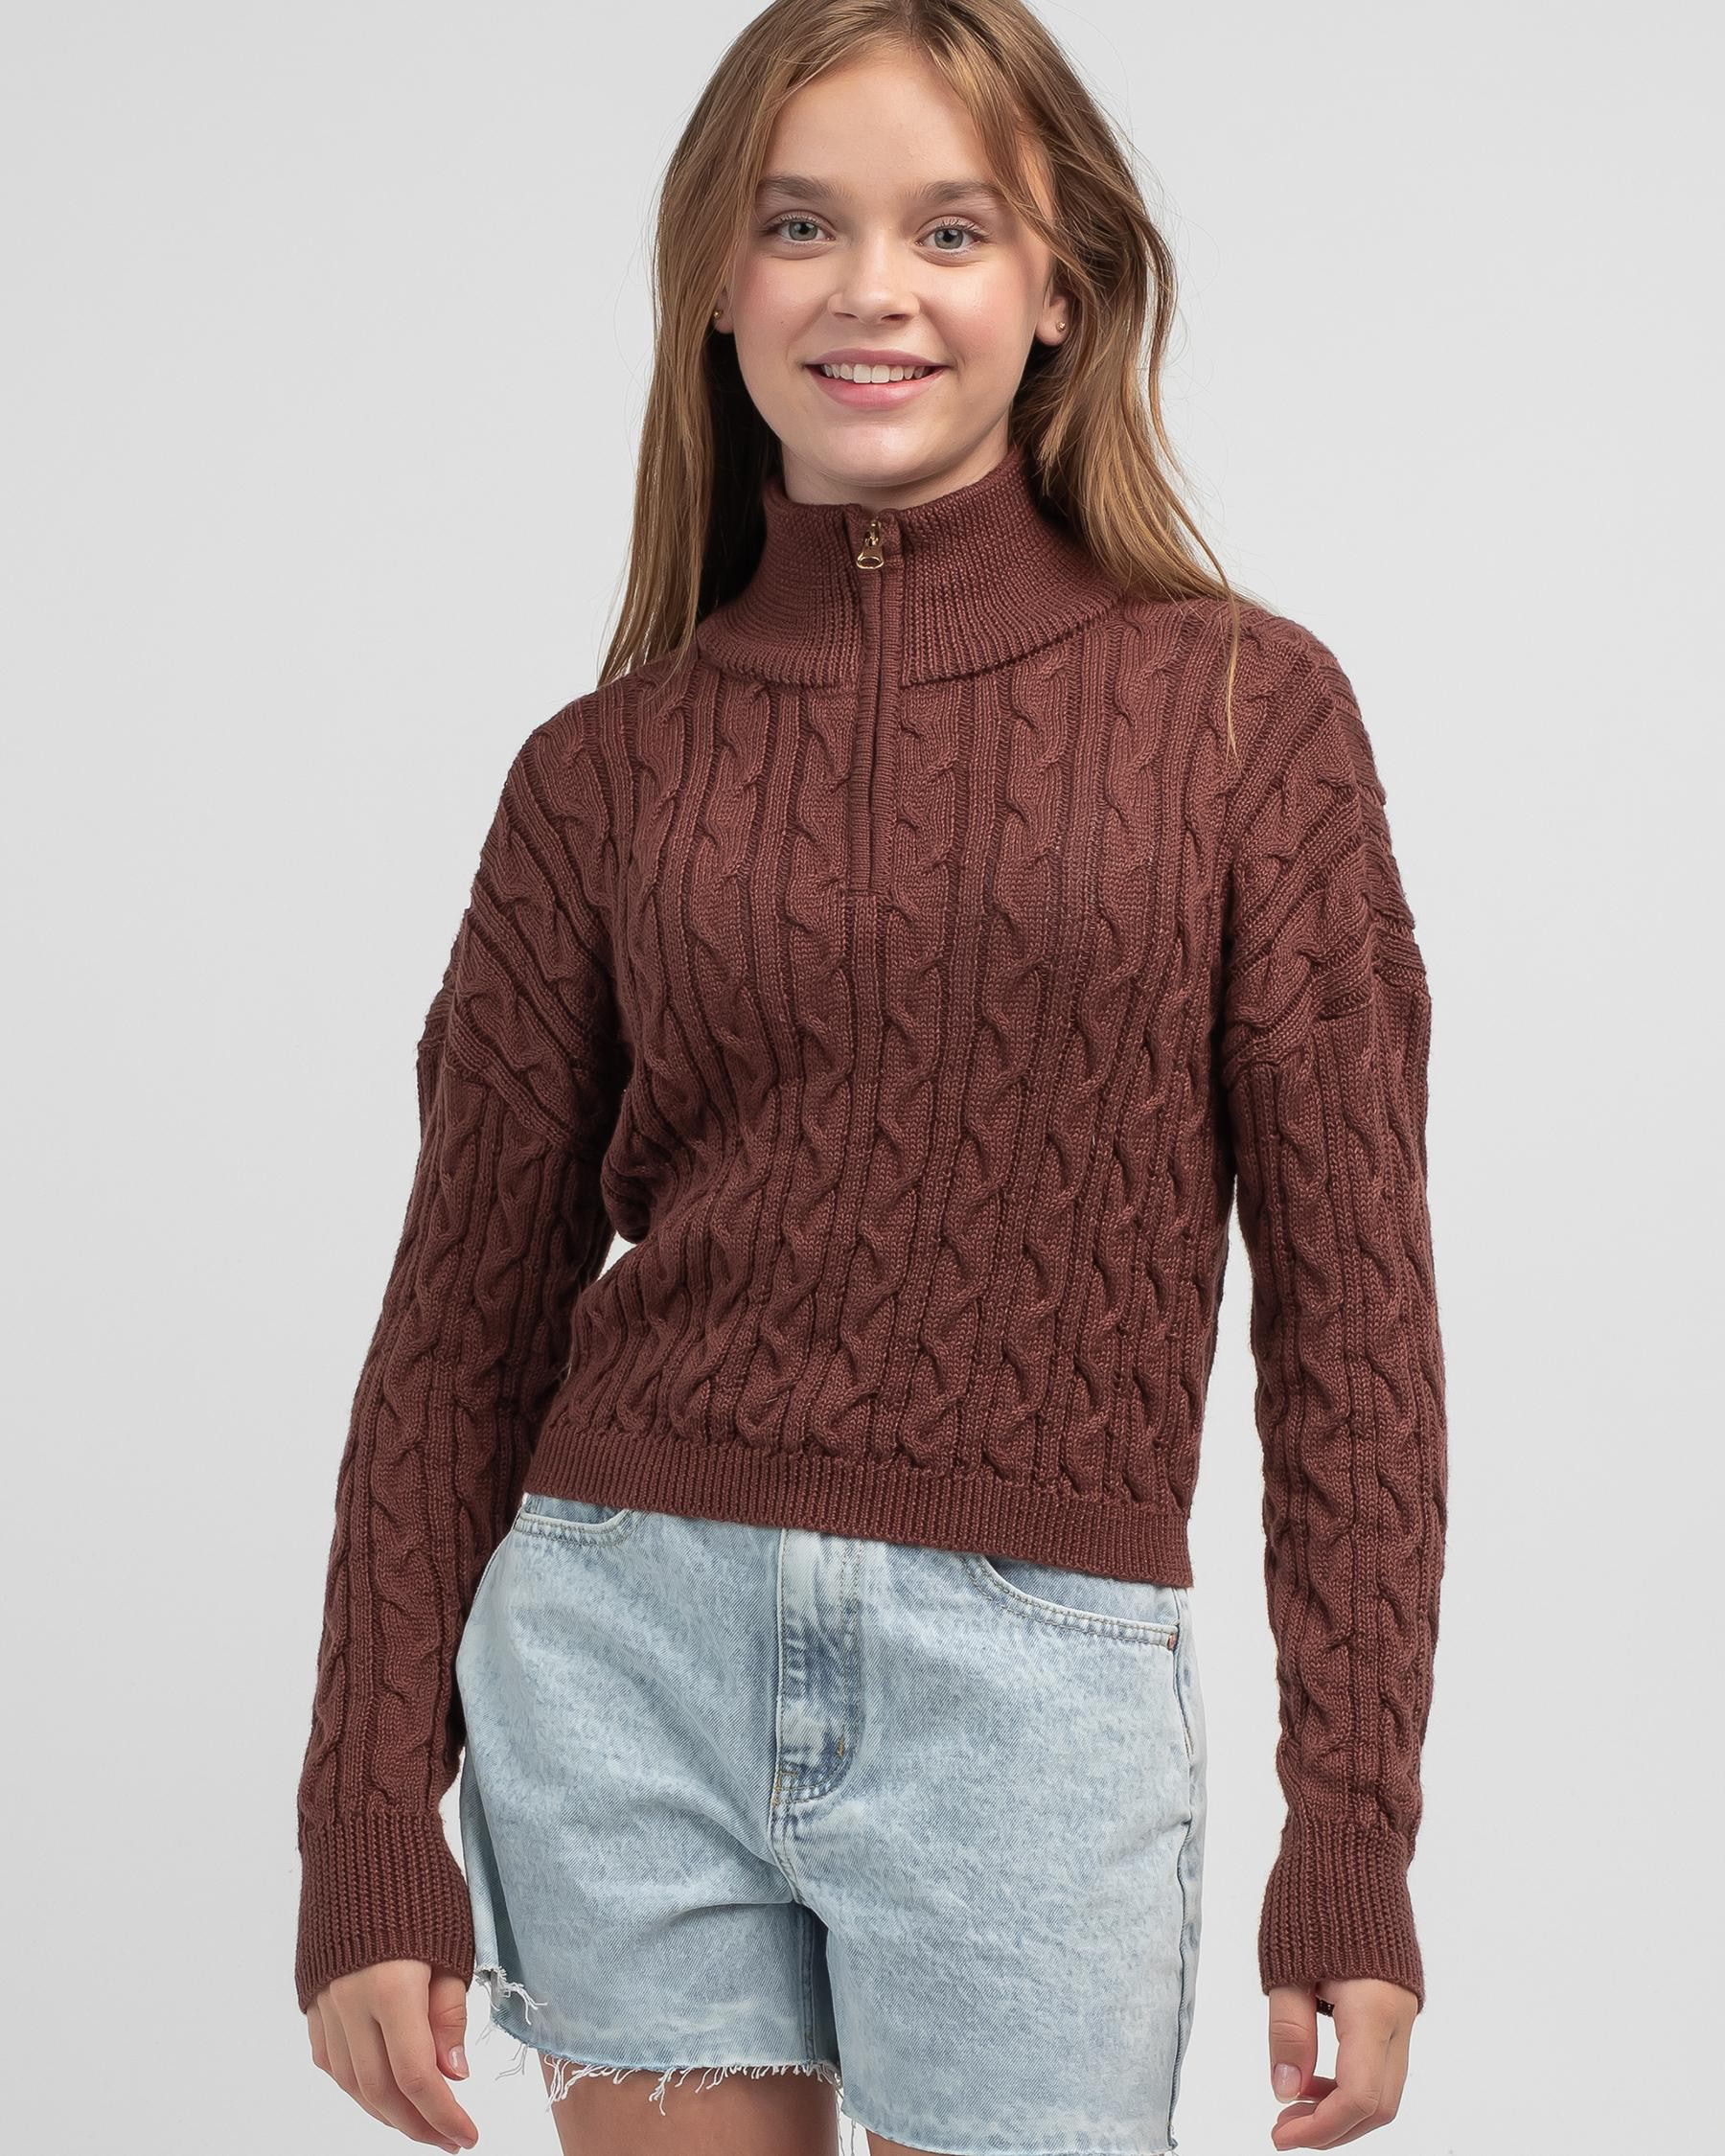 Mooloola Girls' Hamptons Knit Jumper In Chocolate - Fast Shipping ...